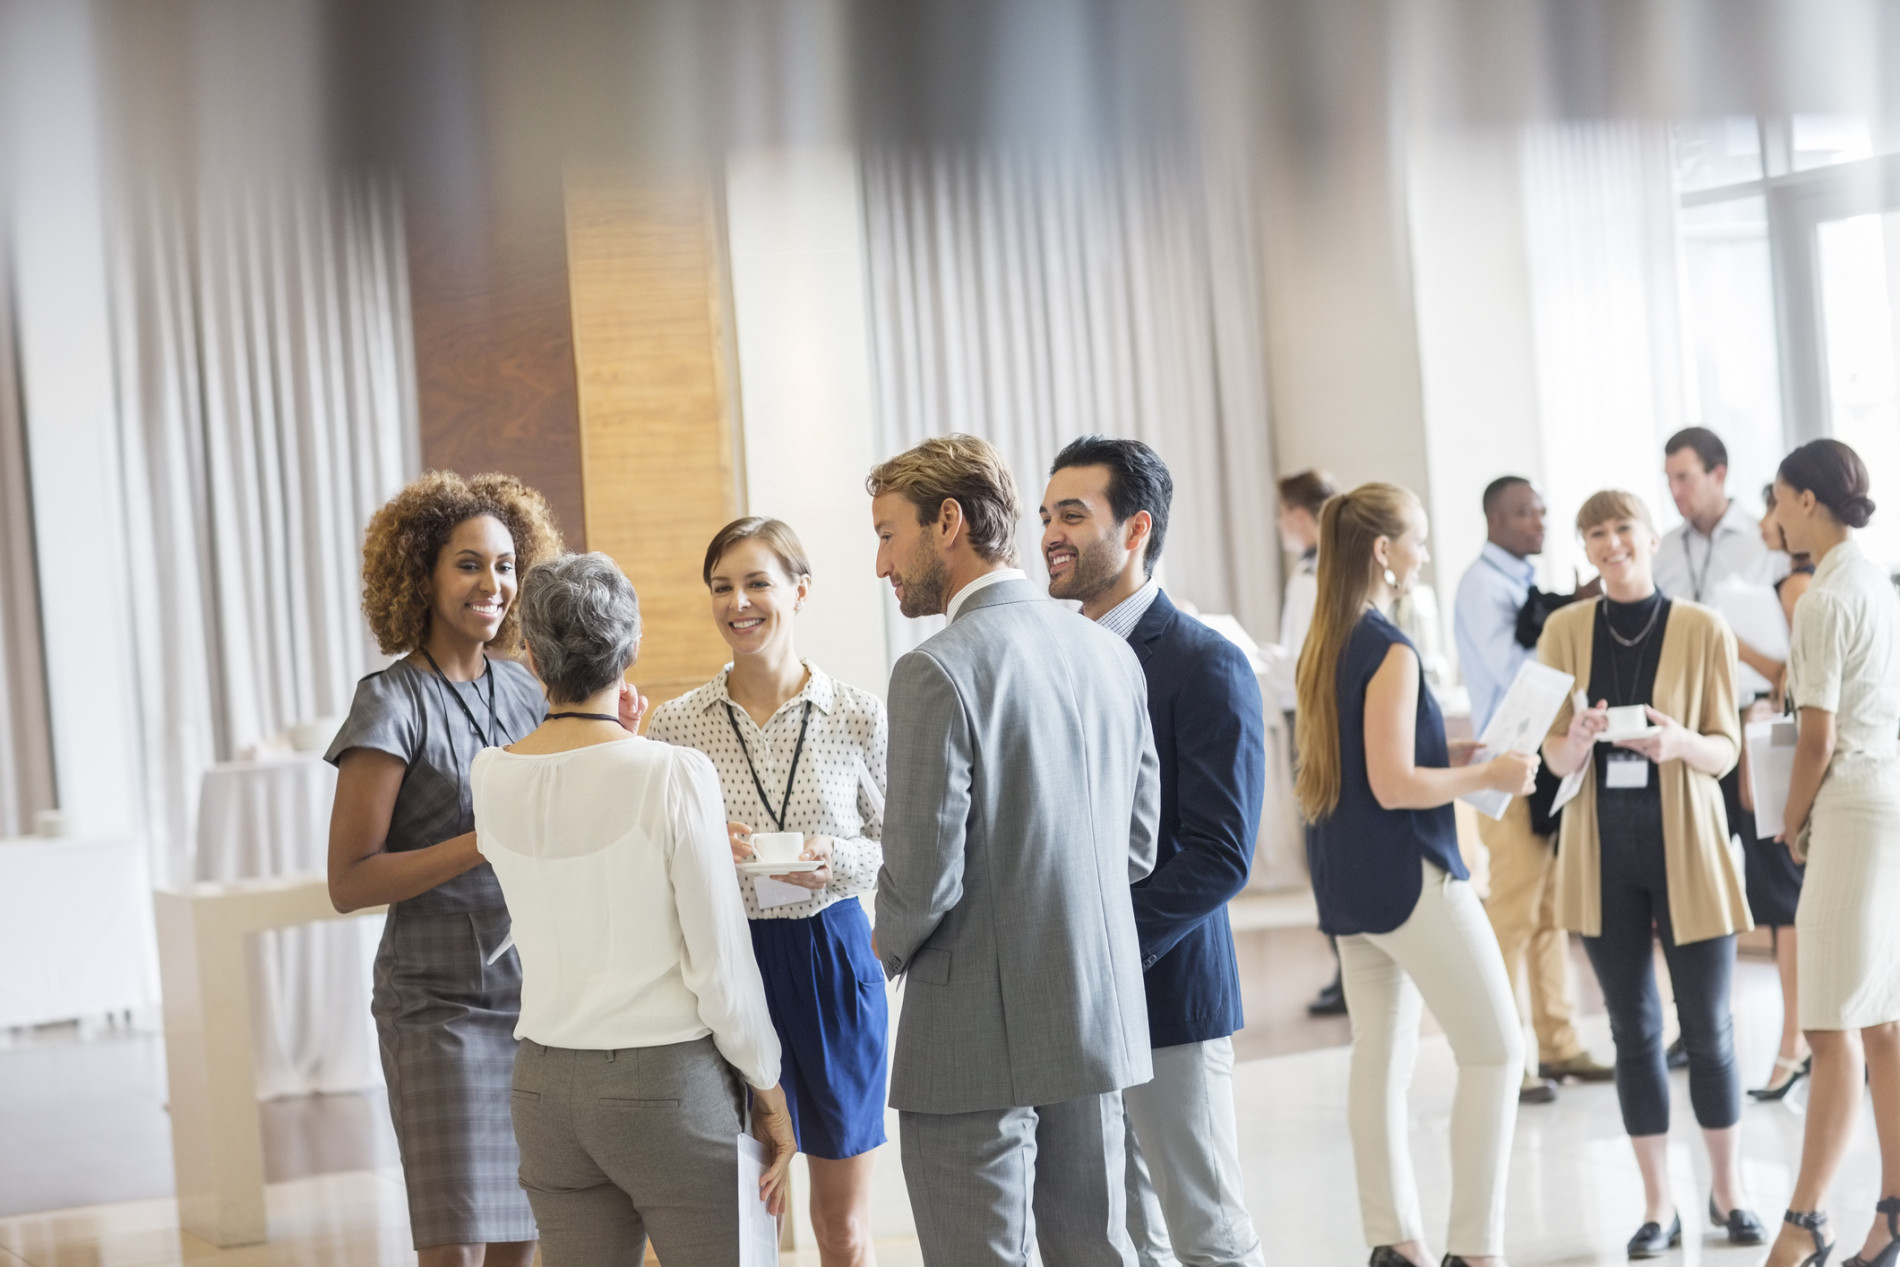 Futureproofing your career, networking